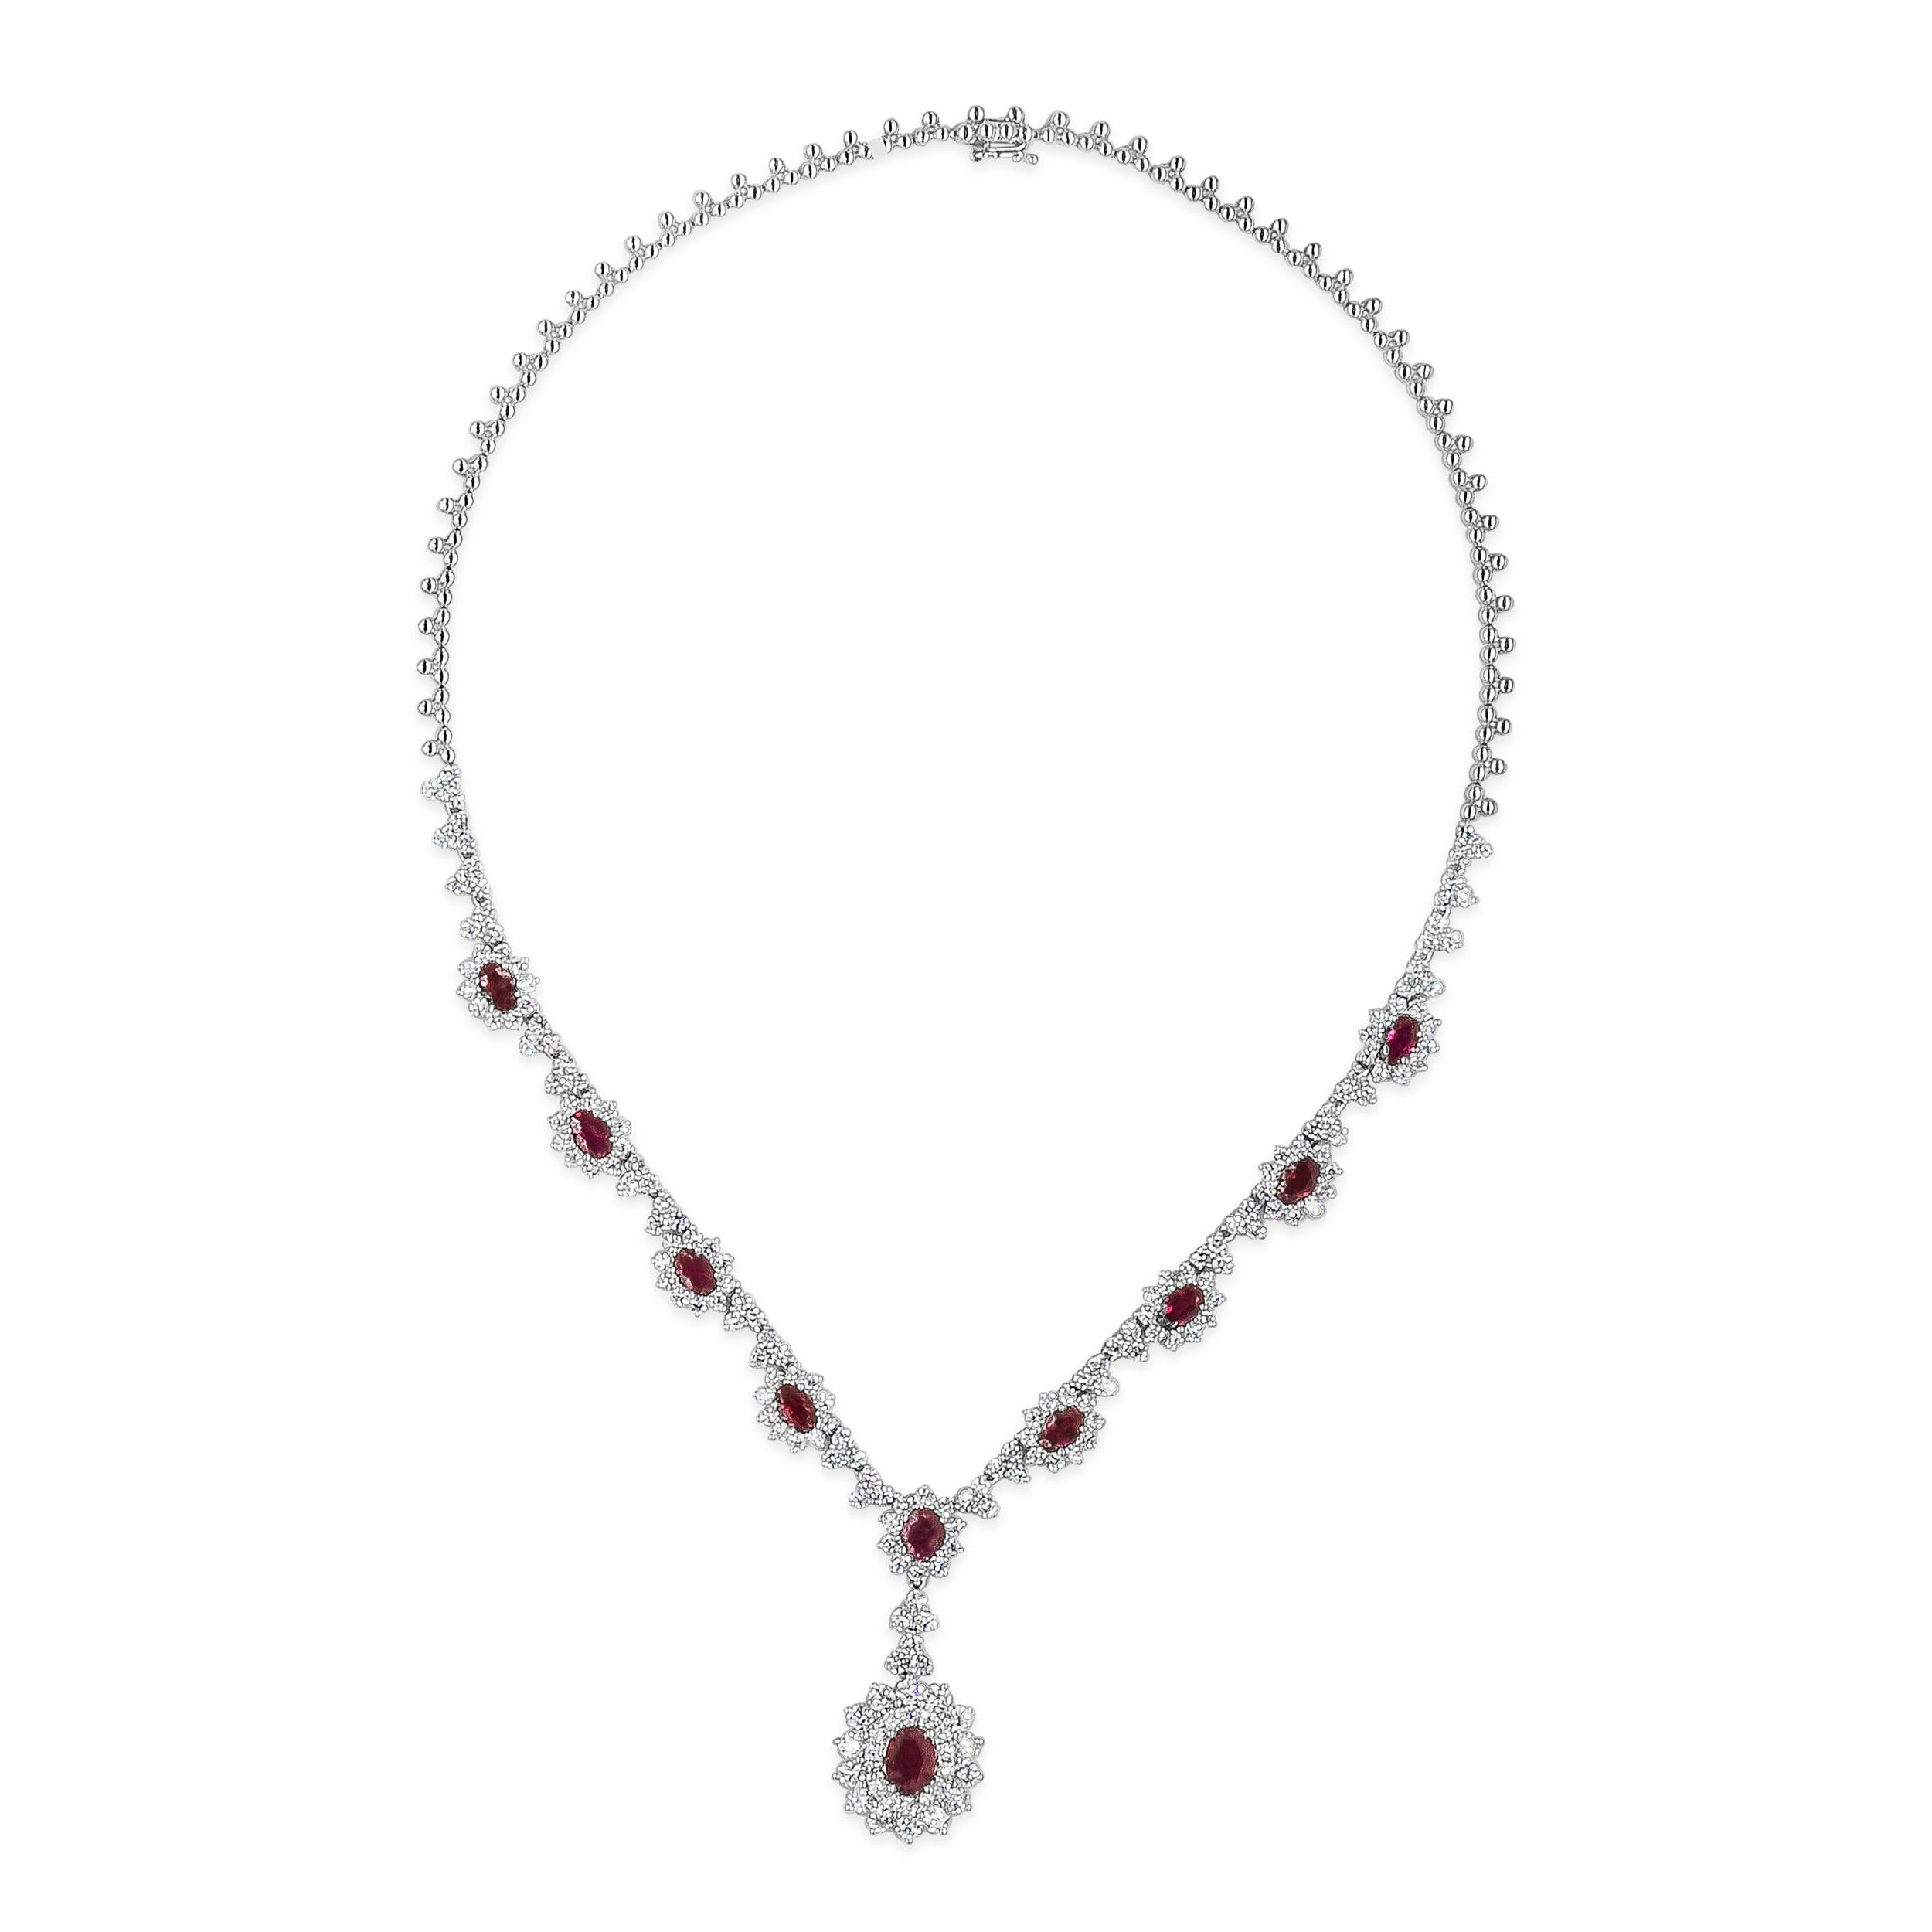 This elegant and classy pendant necklace showcasing a drop pendant with a 1.30 carats oval cut ruby, surrounded by two rows of round brilliant diamonds. Suspended on a ruby set in a round diamond encrusted halo design chain. Rubies weigh 4.63 carats